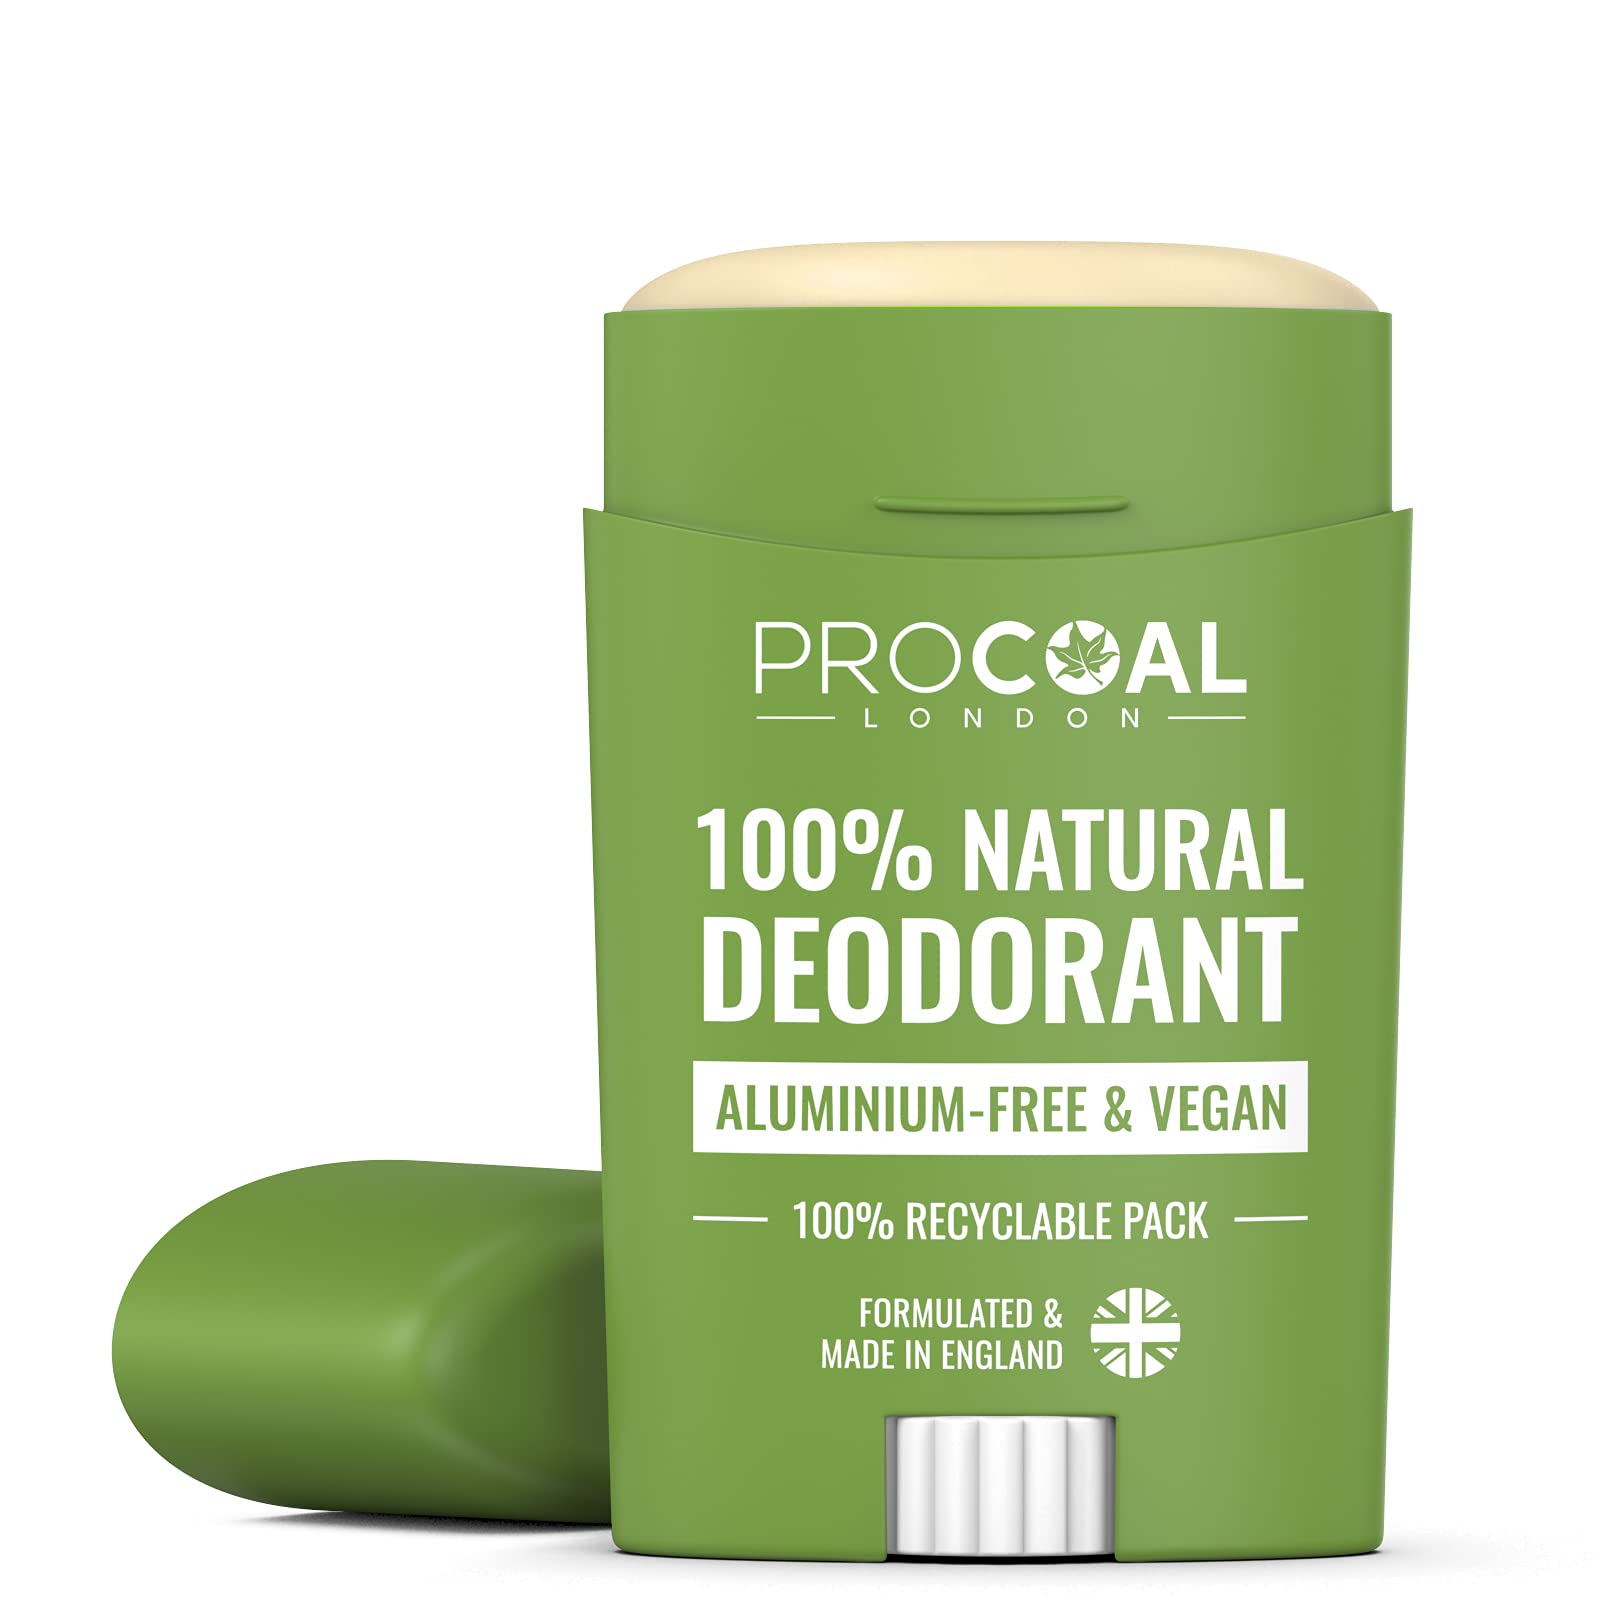 100% Natural Deodorant Stick by Procoal - 100% Recyclable Pack, Aluminium Free, Baking Soda Free Deodorant For Women & Men, Cruelty-Free, Made in UK